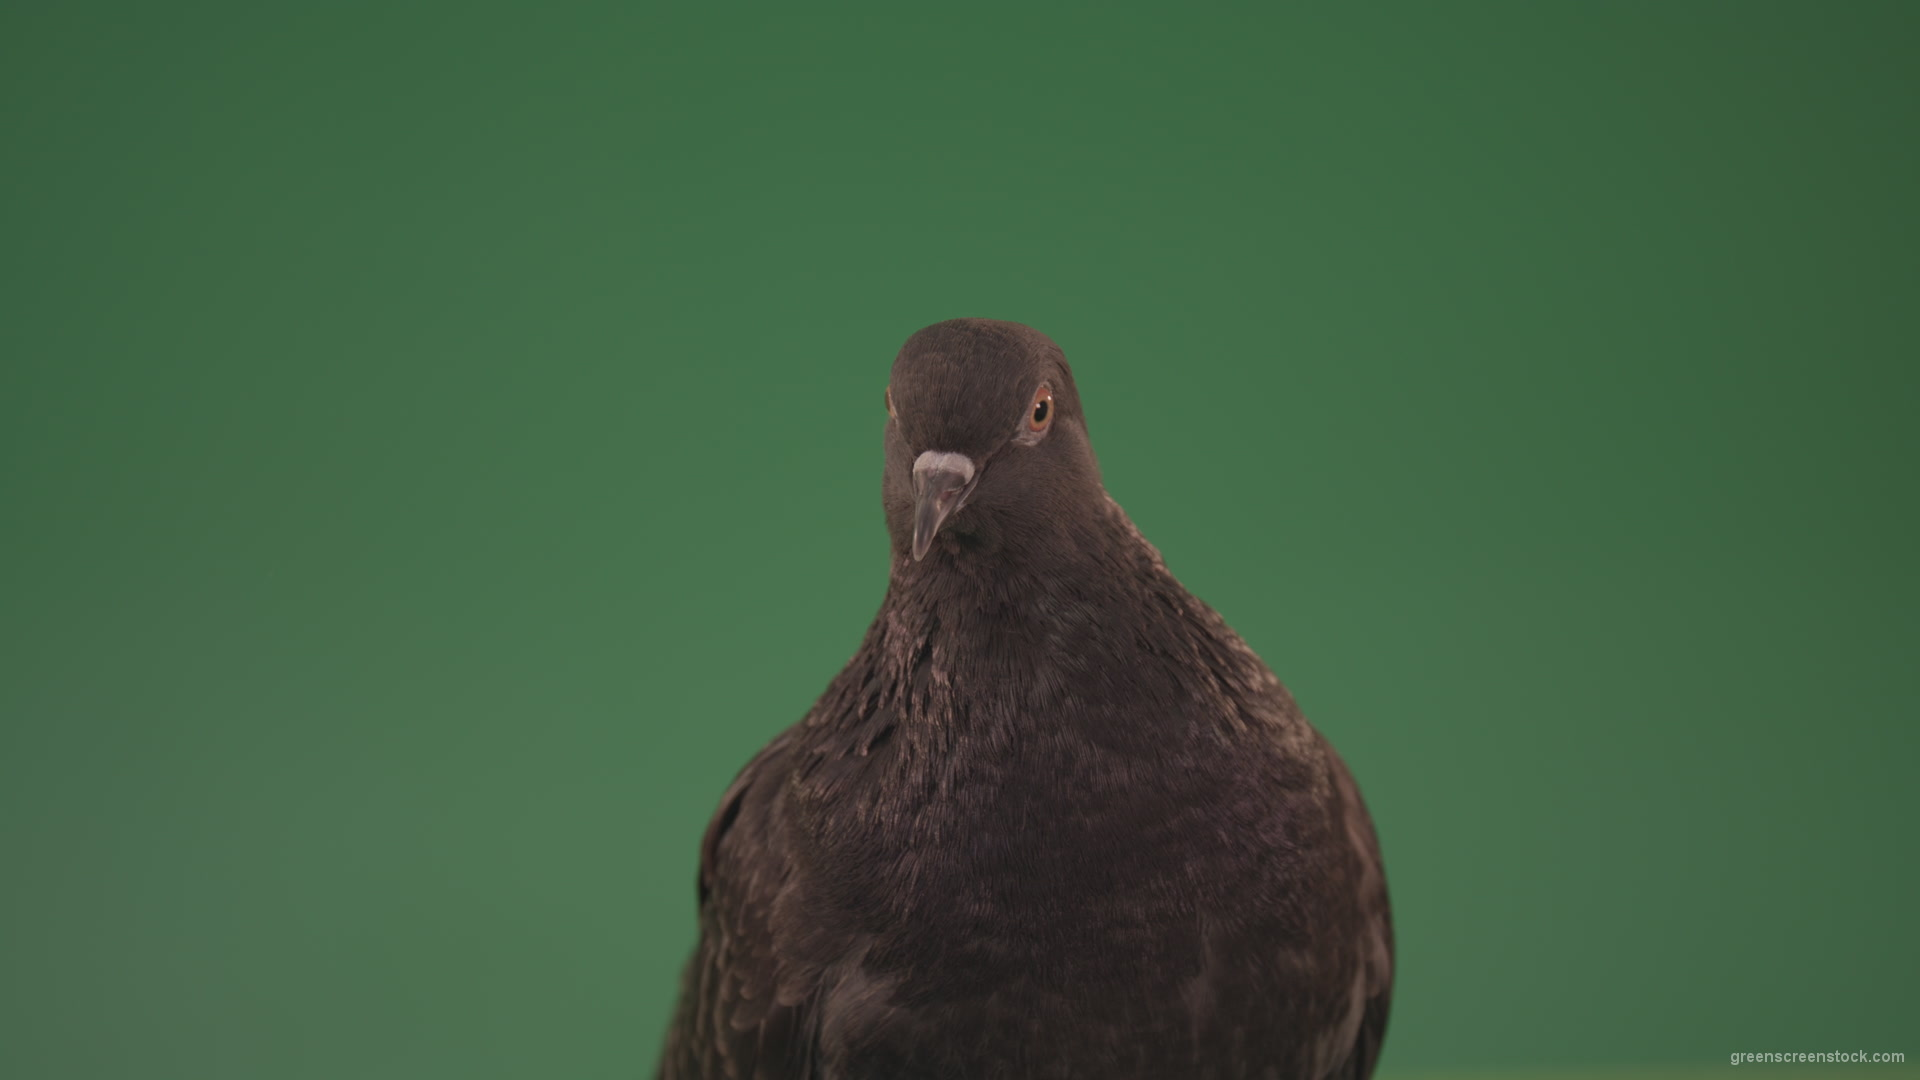 Bird-of-pigeon-is-sitting-on-the-house-and-looking-at-the-city-isolated-on-chromakey-background_001 Green Screen Stock